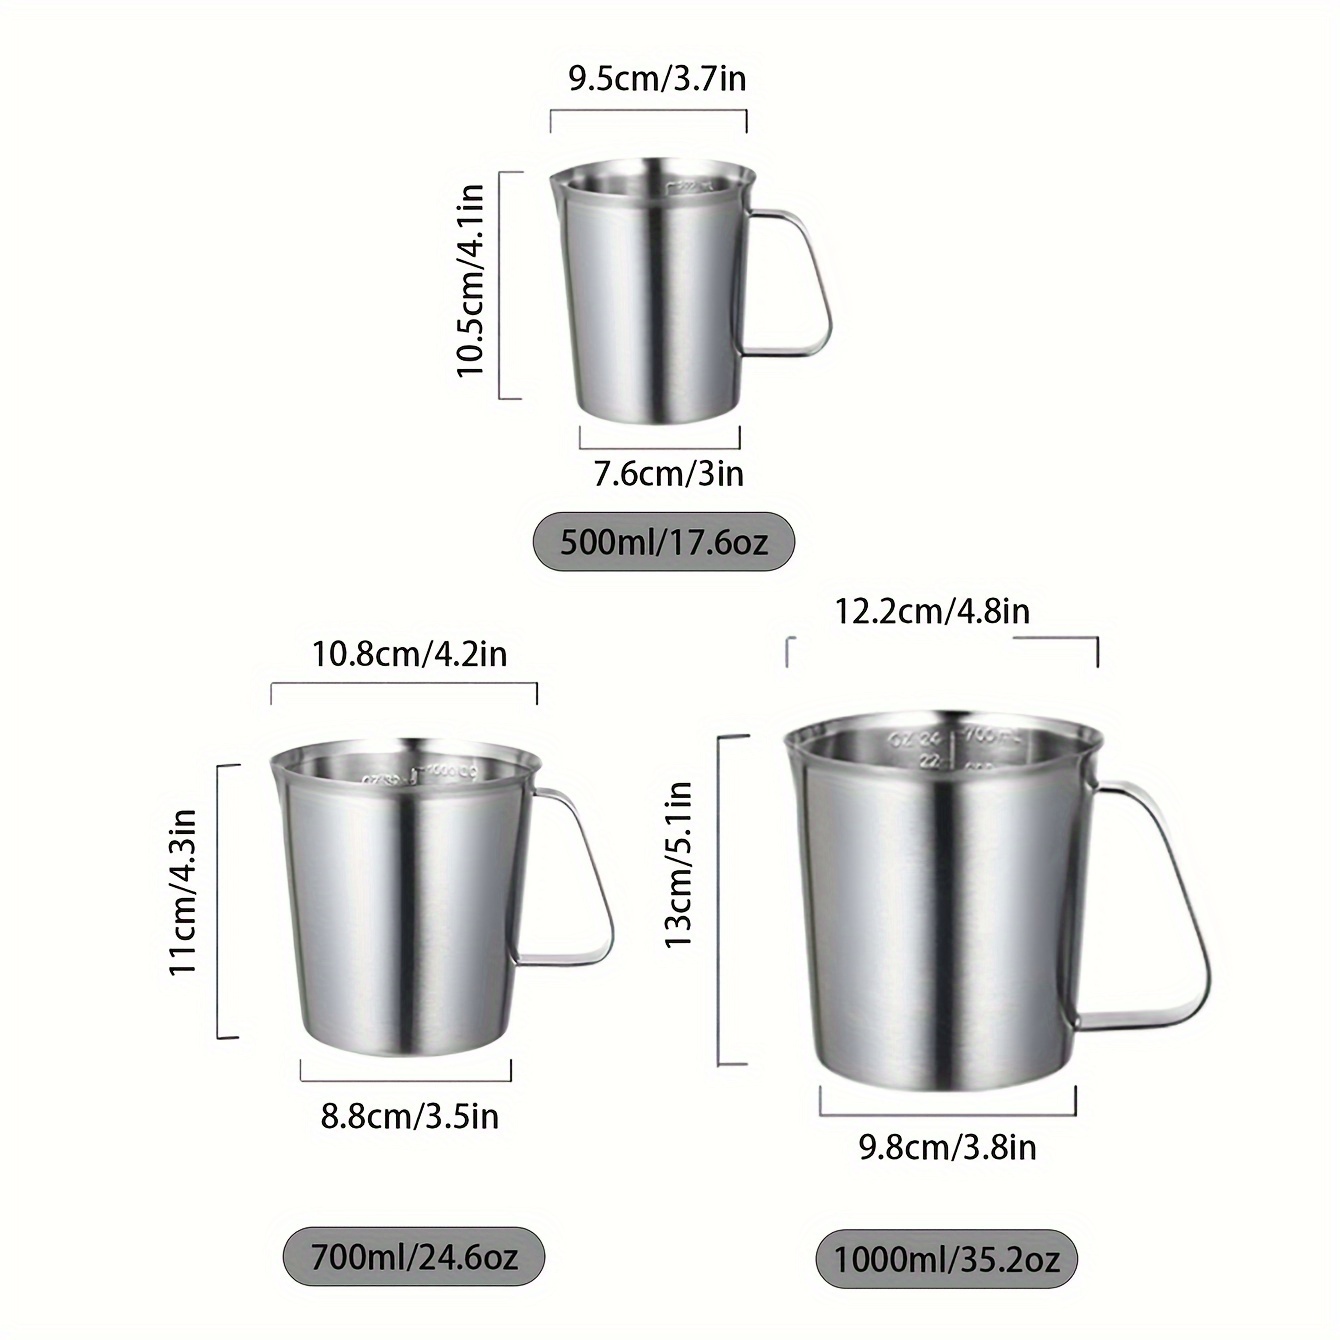 700ml Household Silver Stainless Steel Thickened Milk Frother Cup